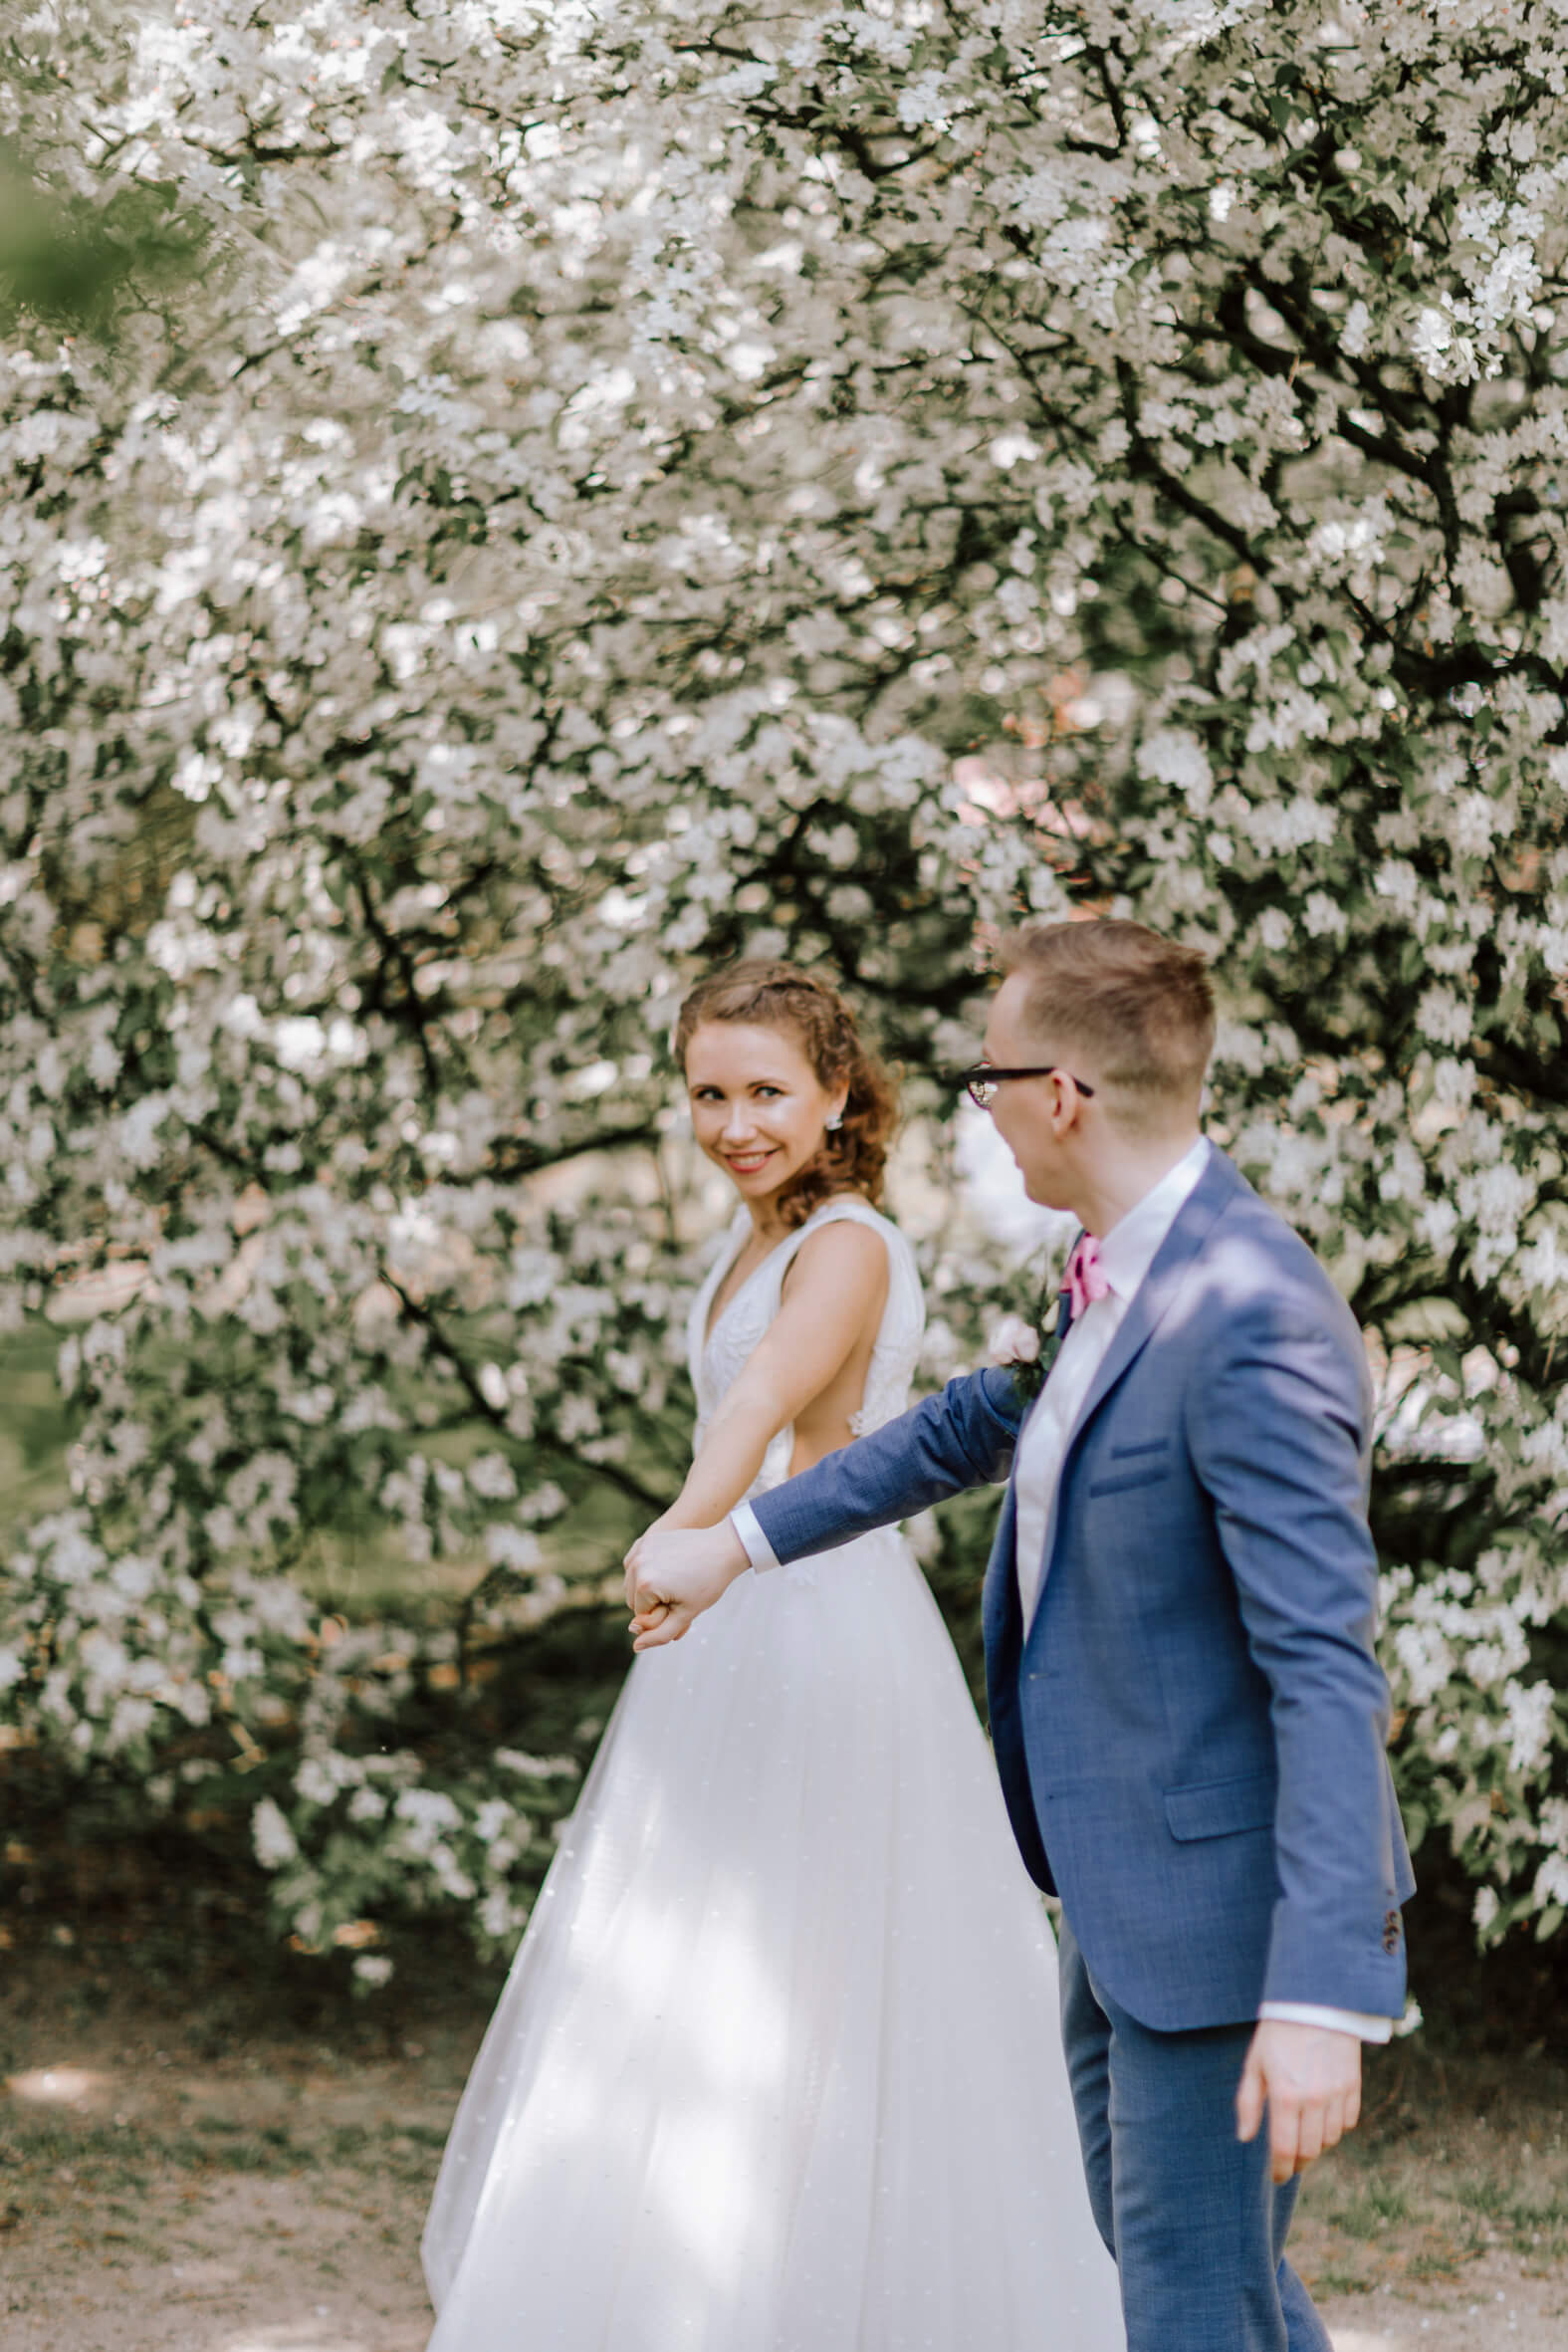 Wedding-Update-bridal-couple-Shooting-under-the-Cherry-Trees-kationette-wedding-2018-bride